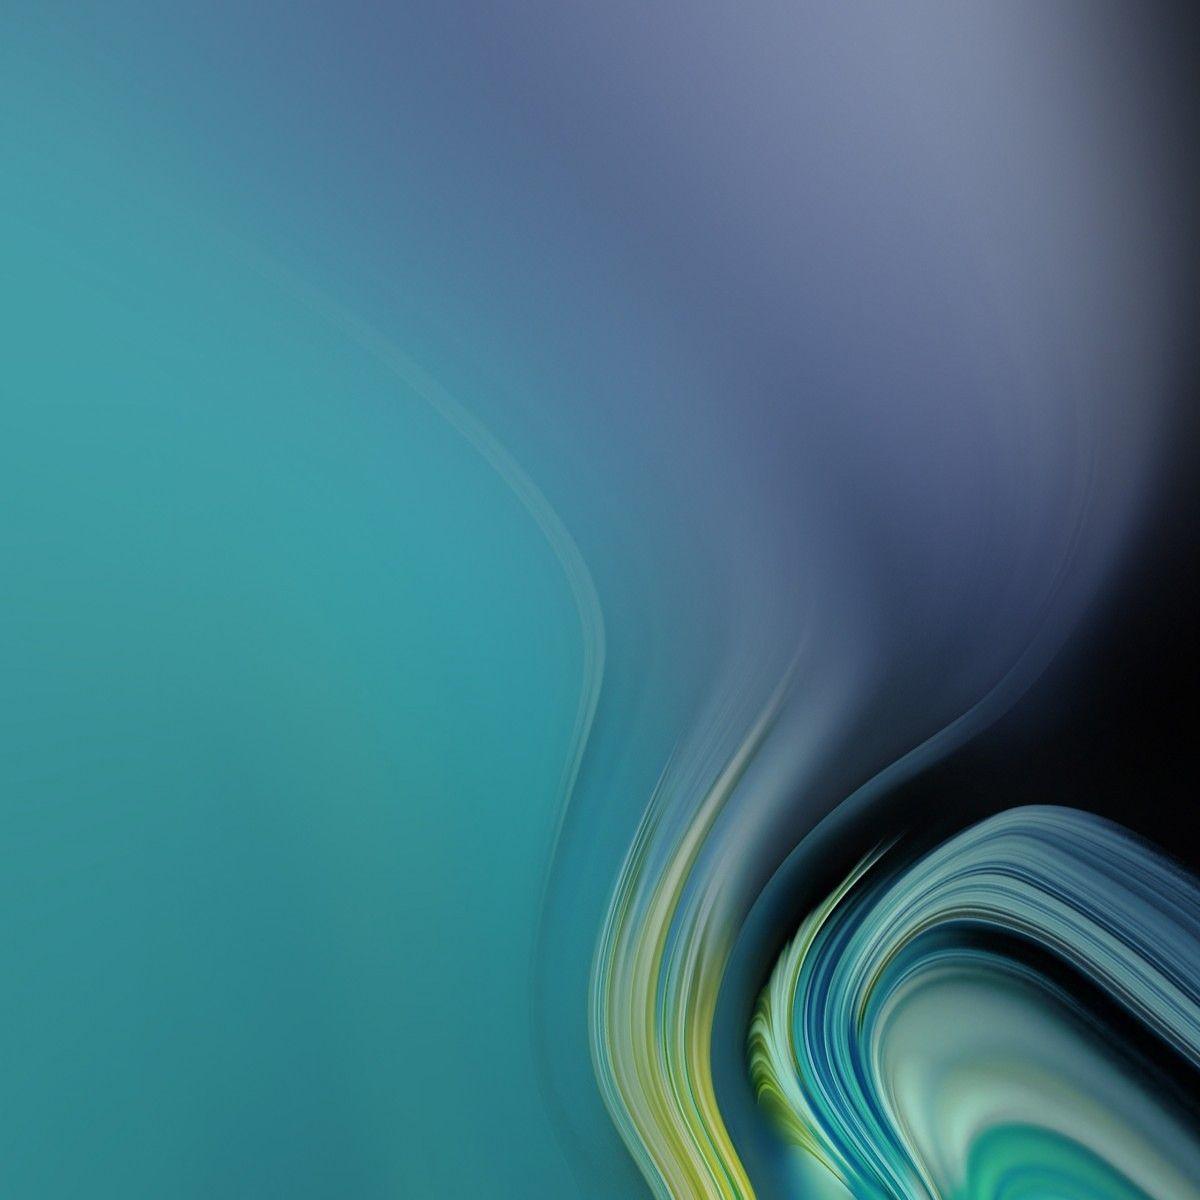 Samsung Galaxy Note wallpapers now available for download